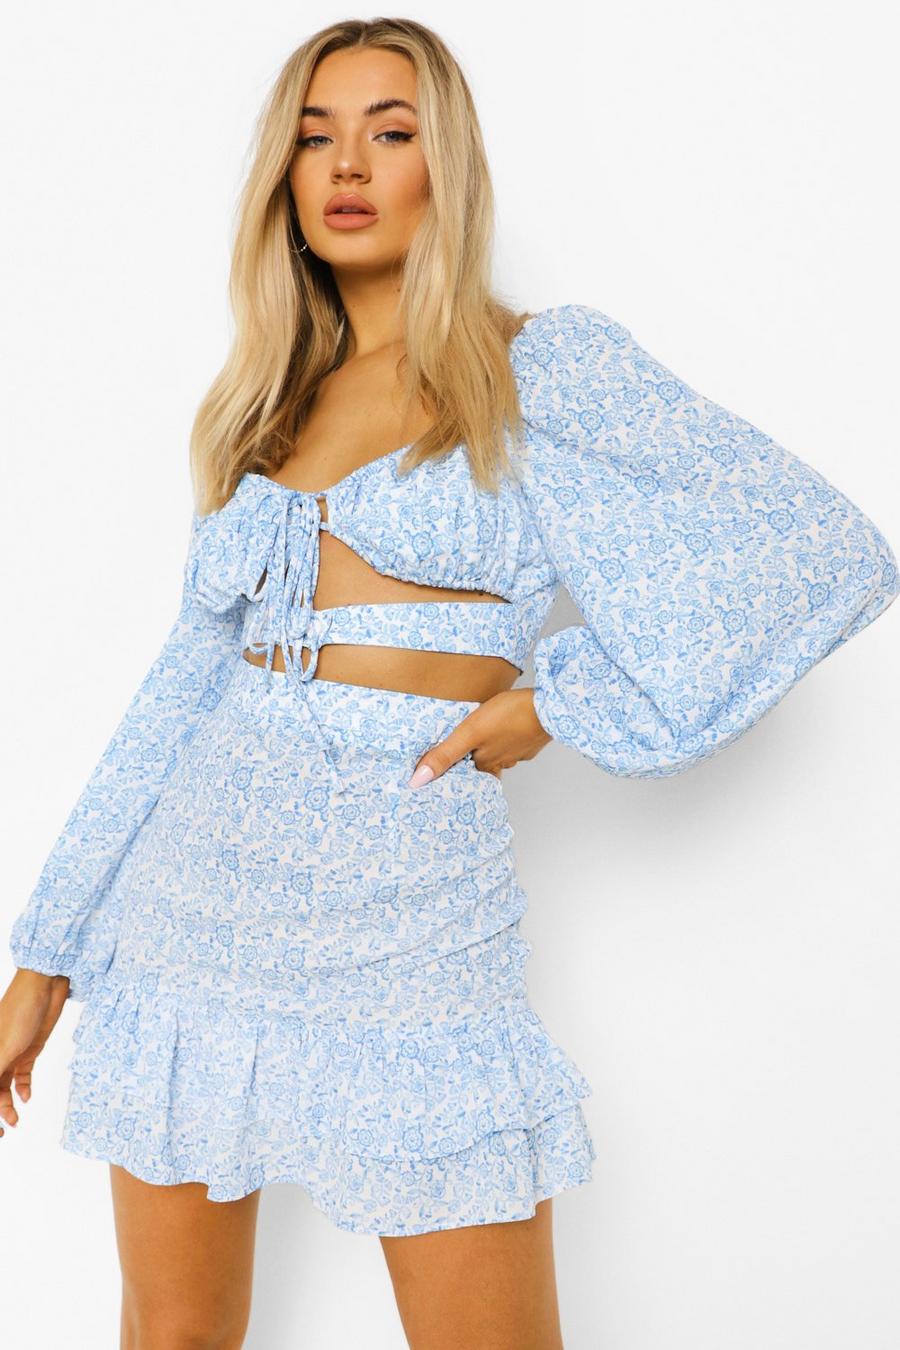 Blue Floral Cut Out Ruffle Skirt Co-ord